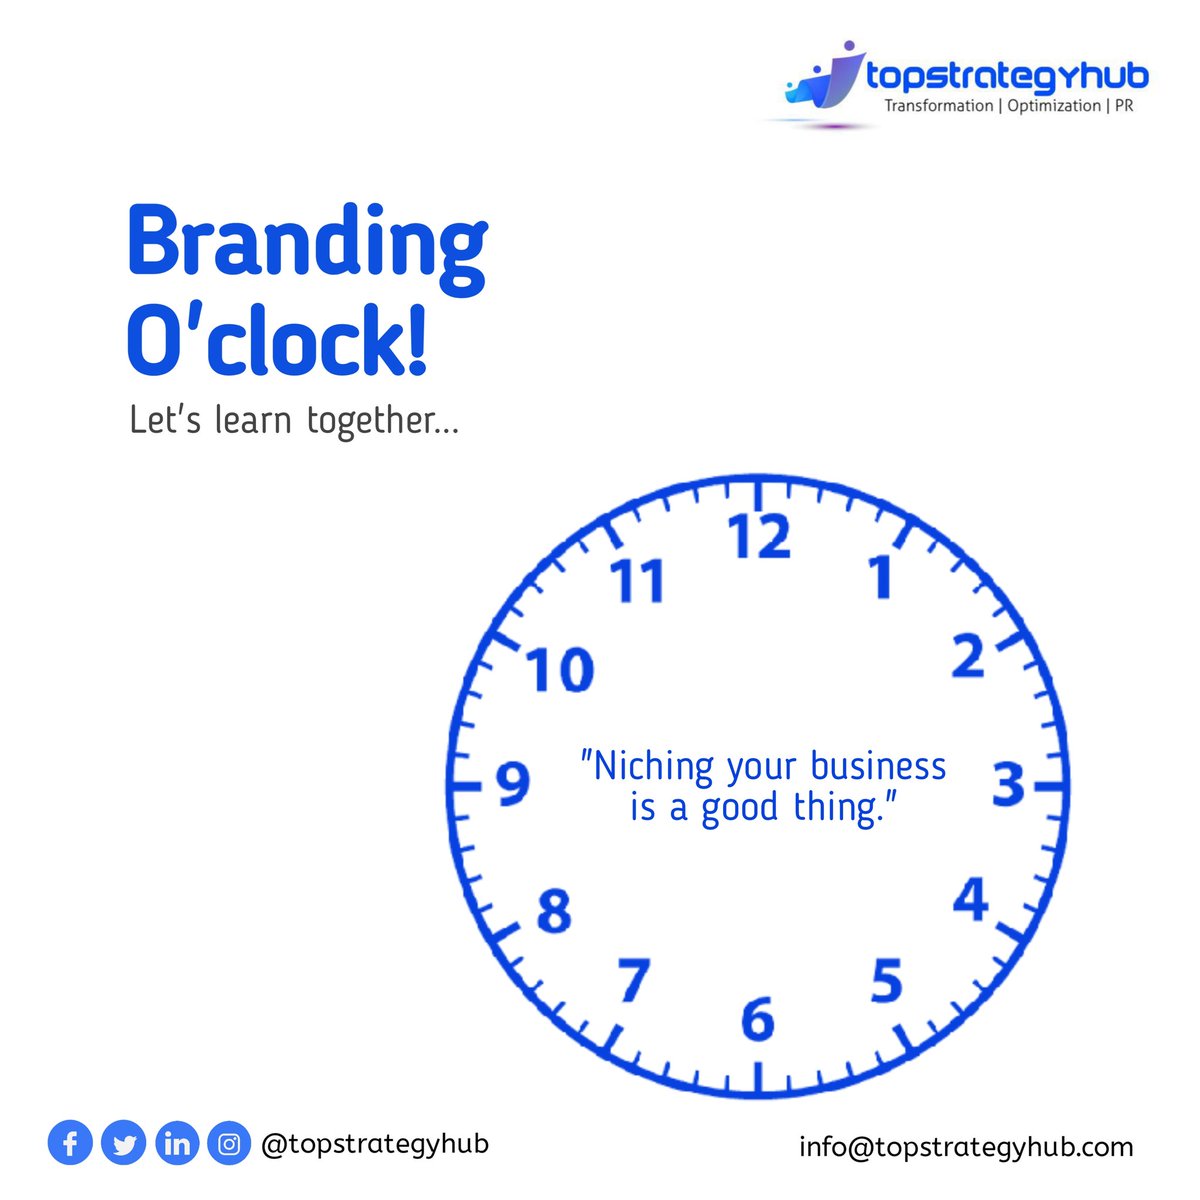 Branding O’clock. Let's learn together.

#Topstrategyhub
#Transformation
#Optimization
#PublicRelations